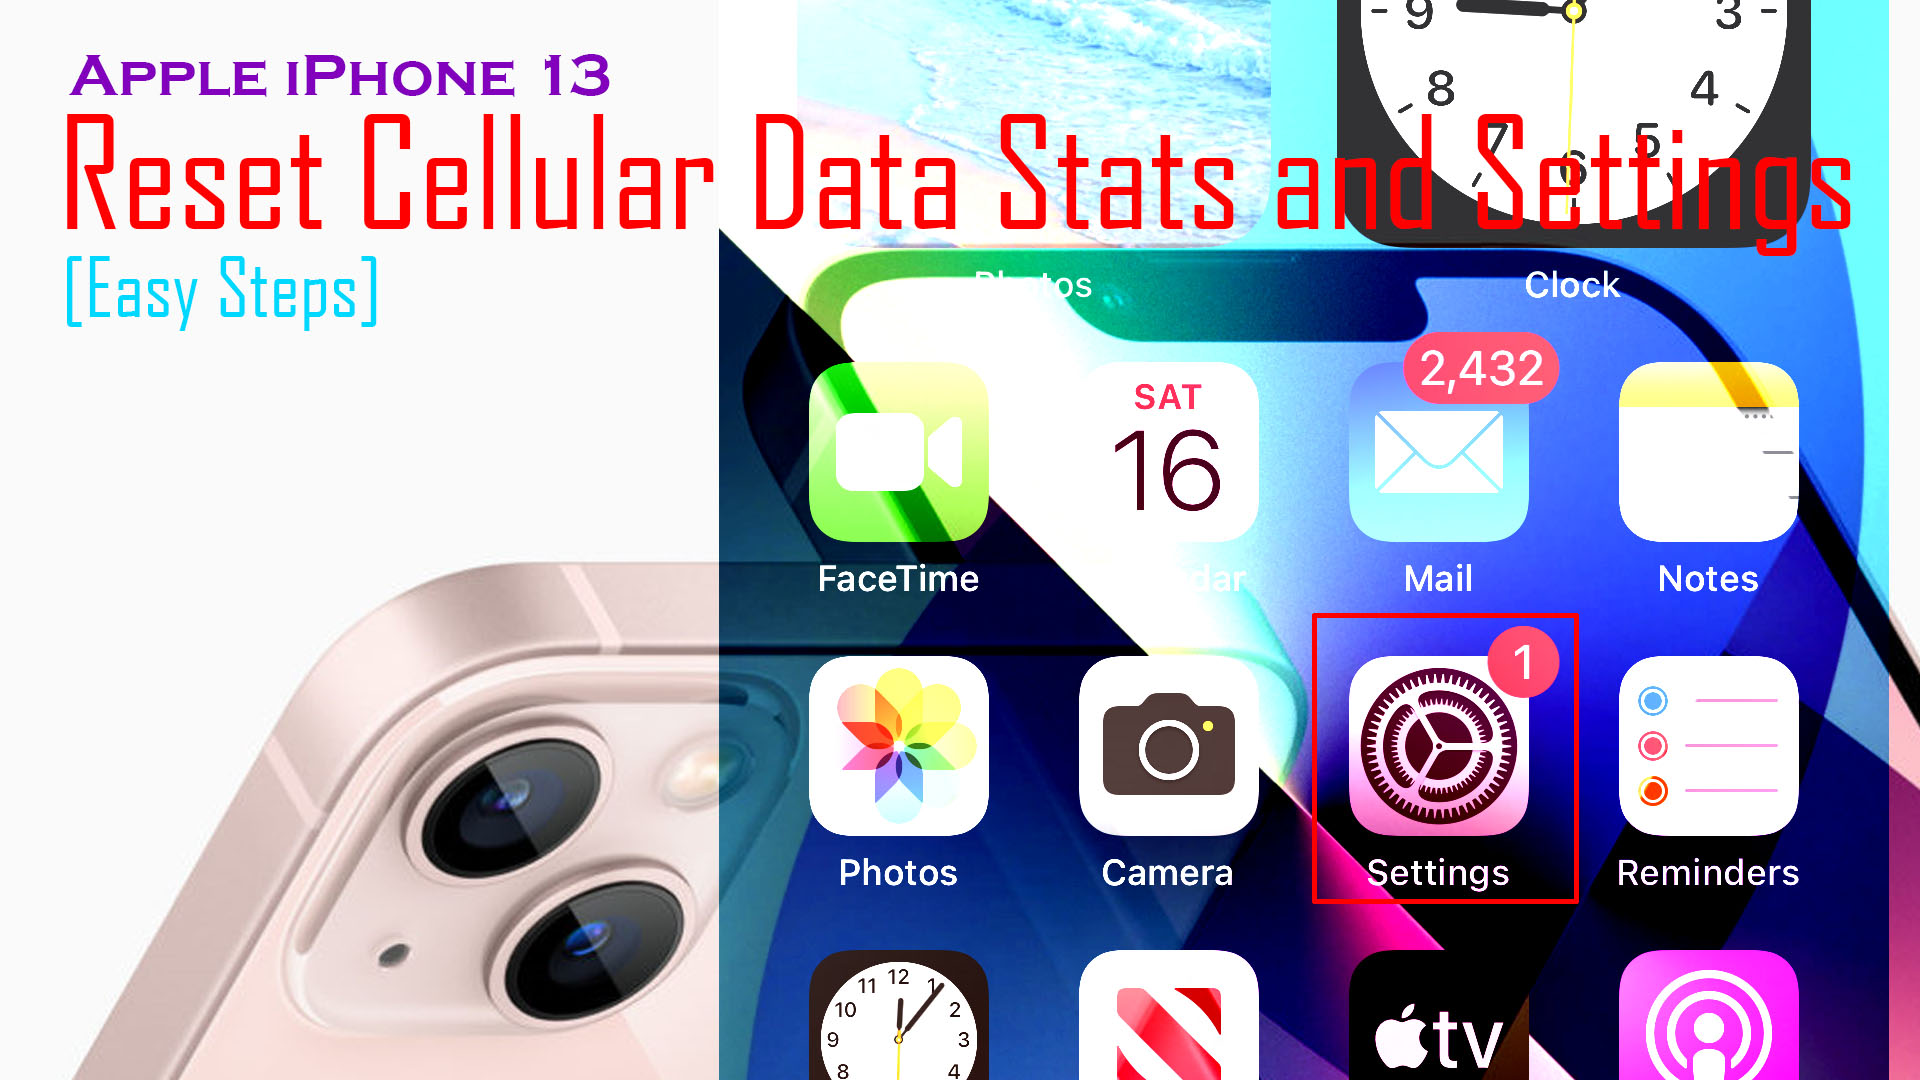 Apple iPhone 13 Reset Cellular Data Statistics and Settings Easy Steps